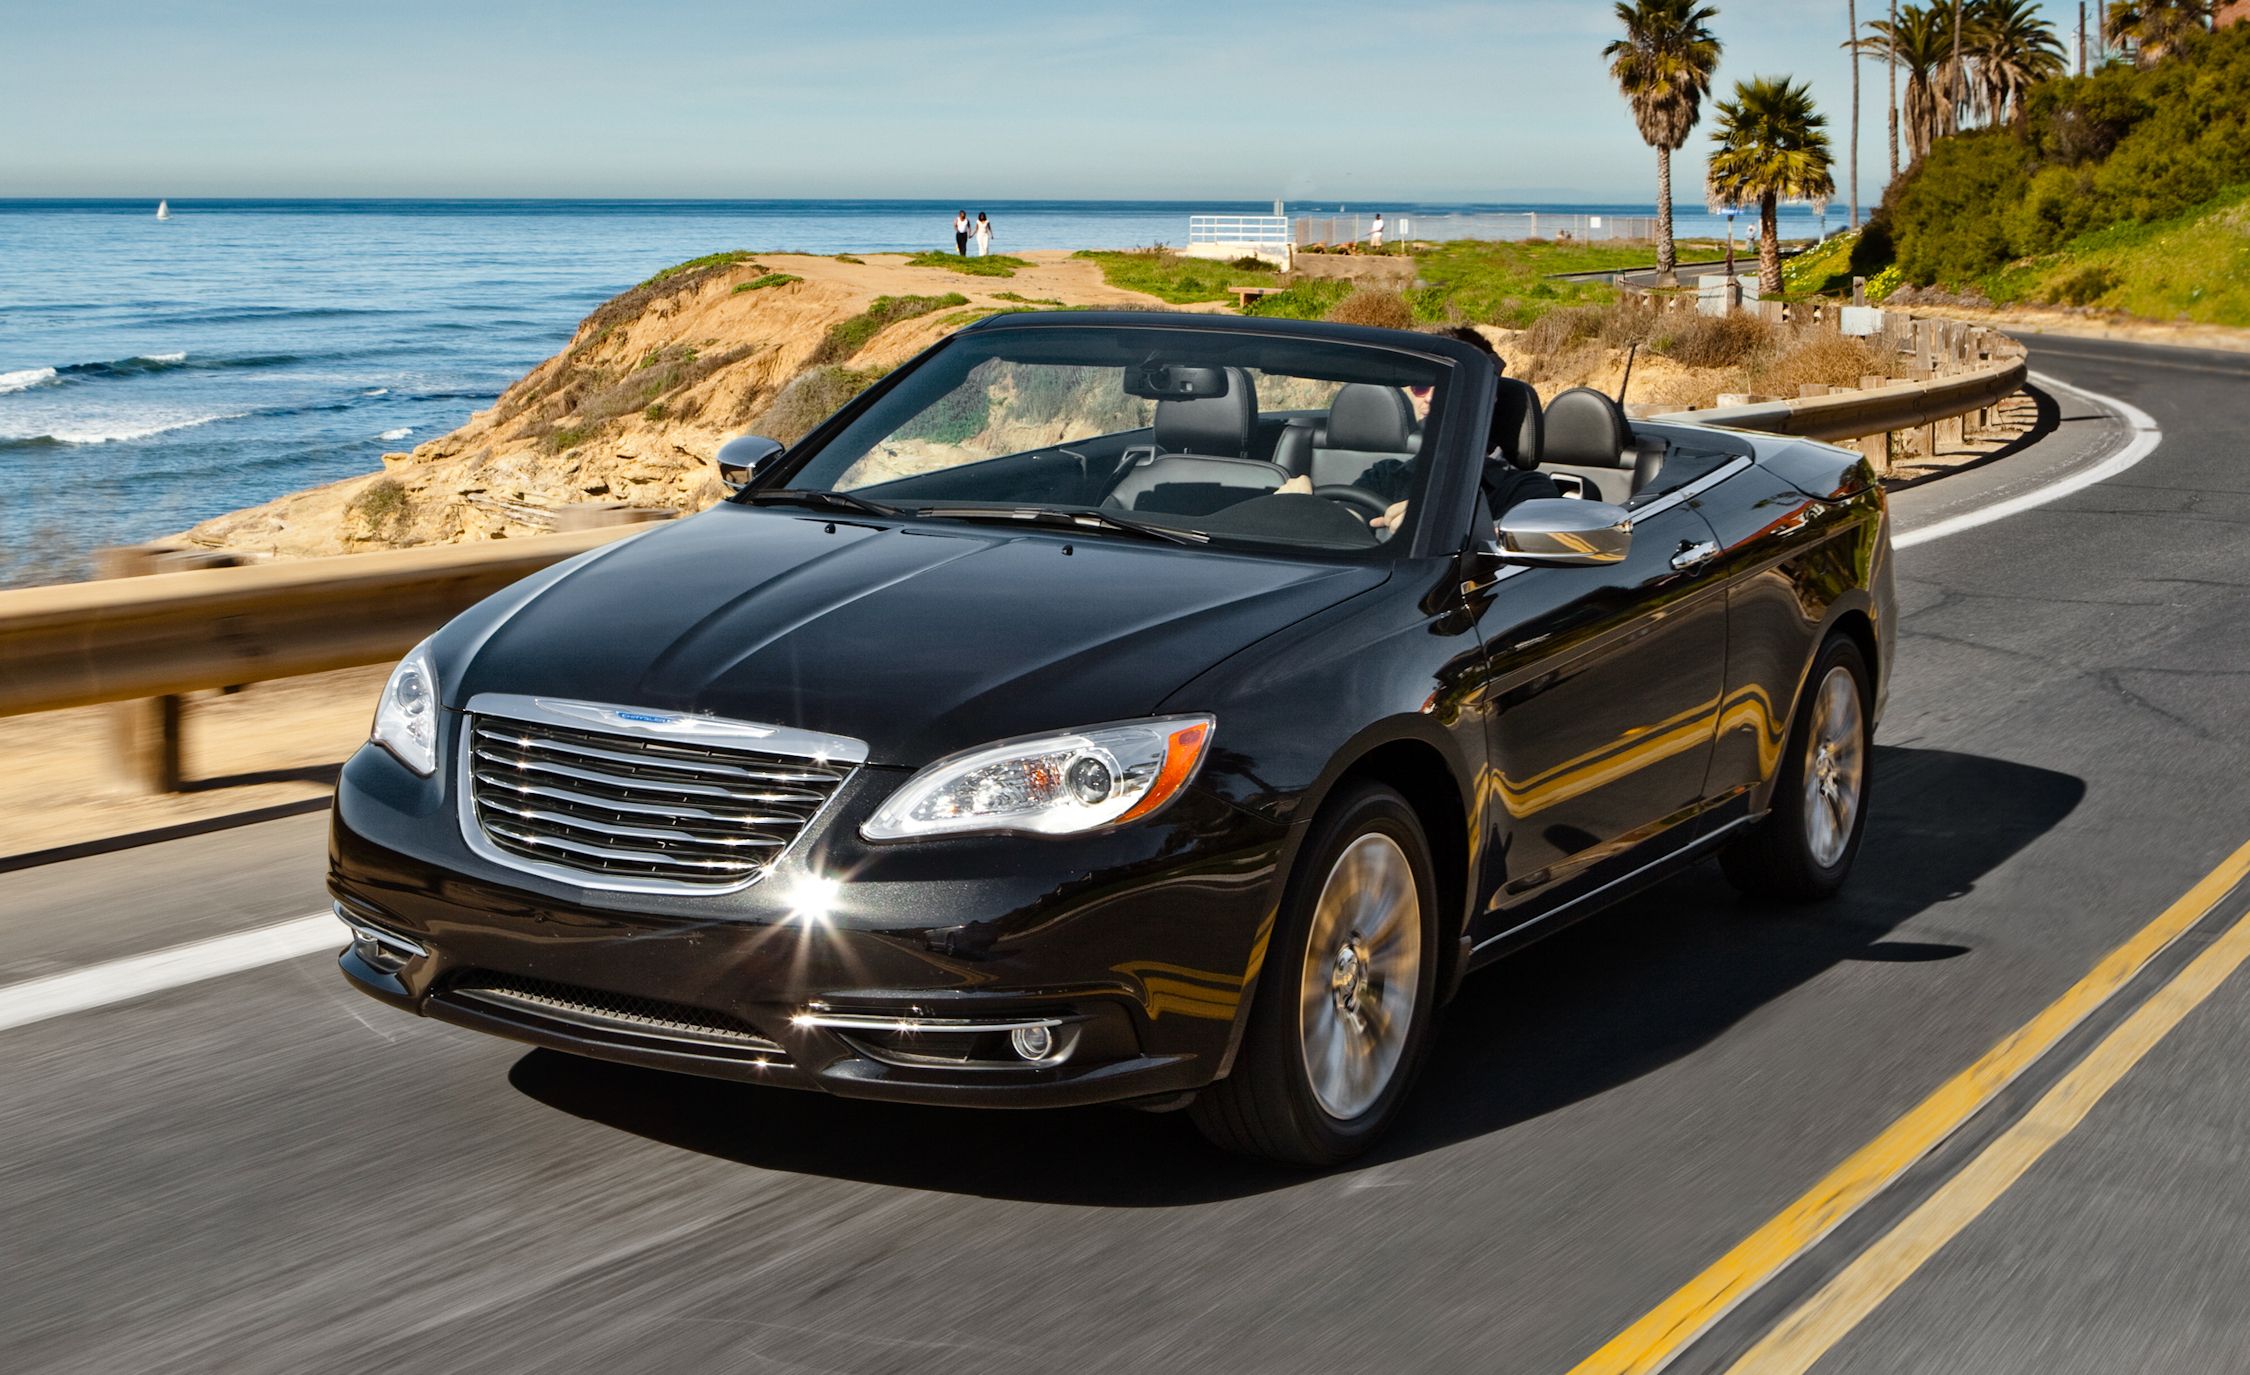 2011-chrysler-200-convertible-drive-chrysler-200-review-car-and-driver